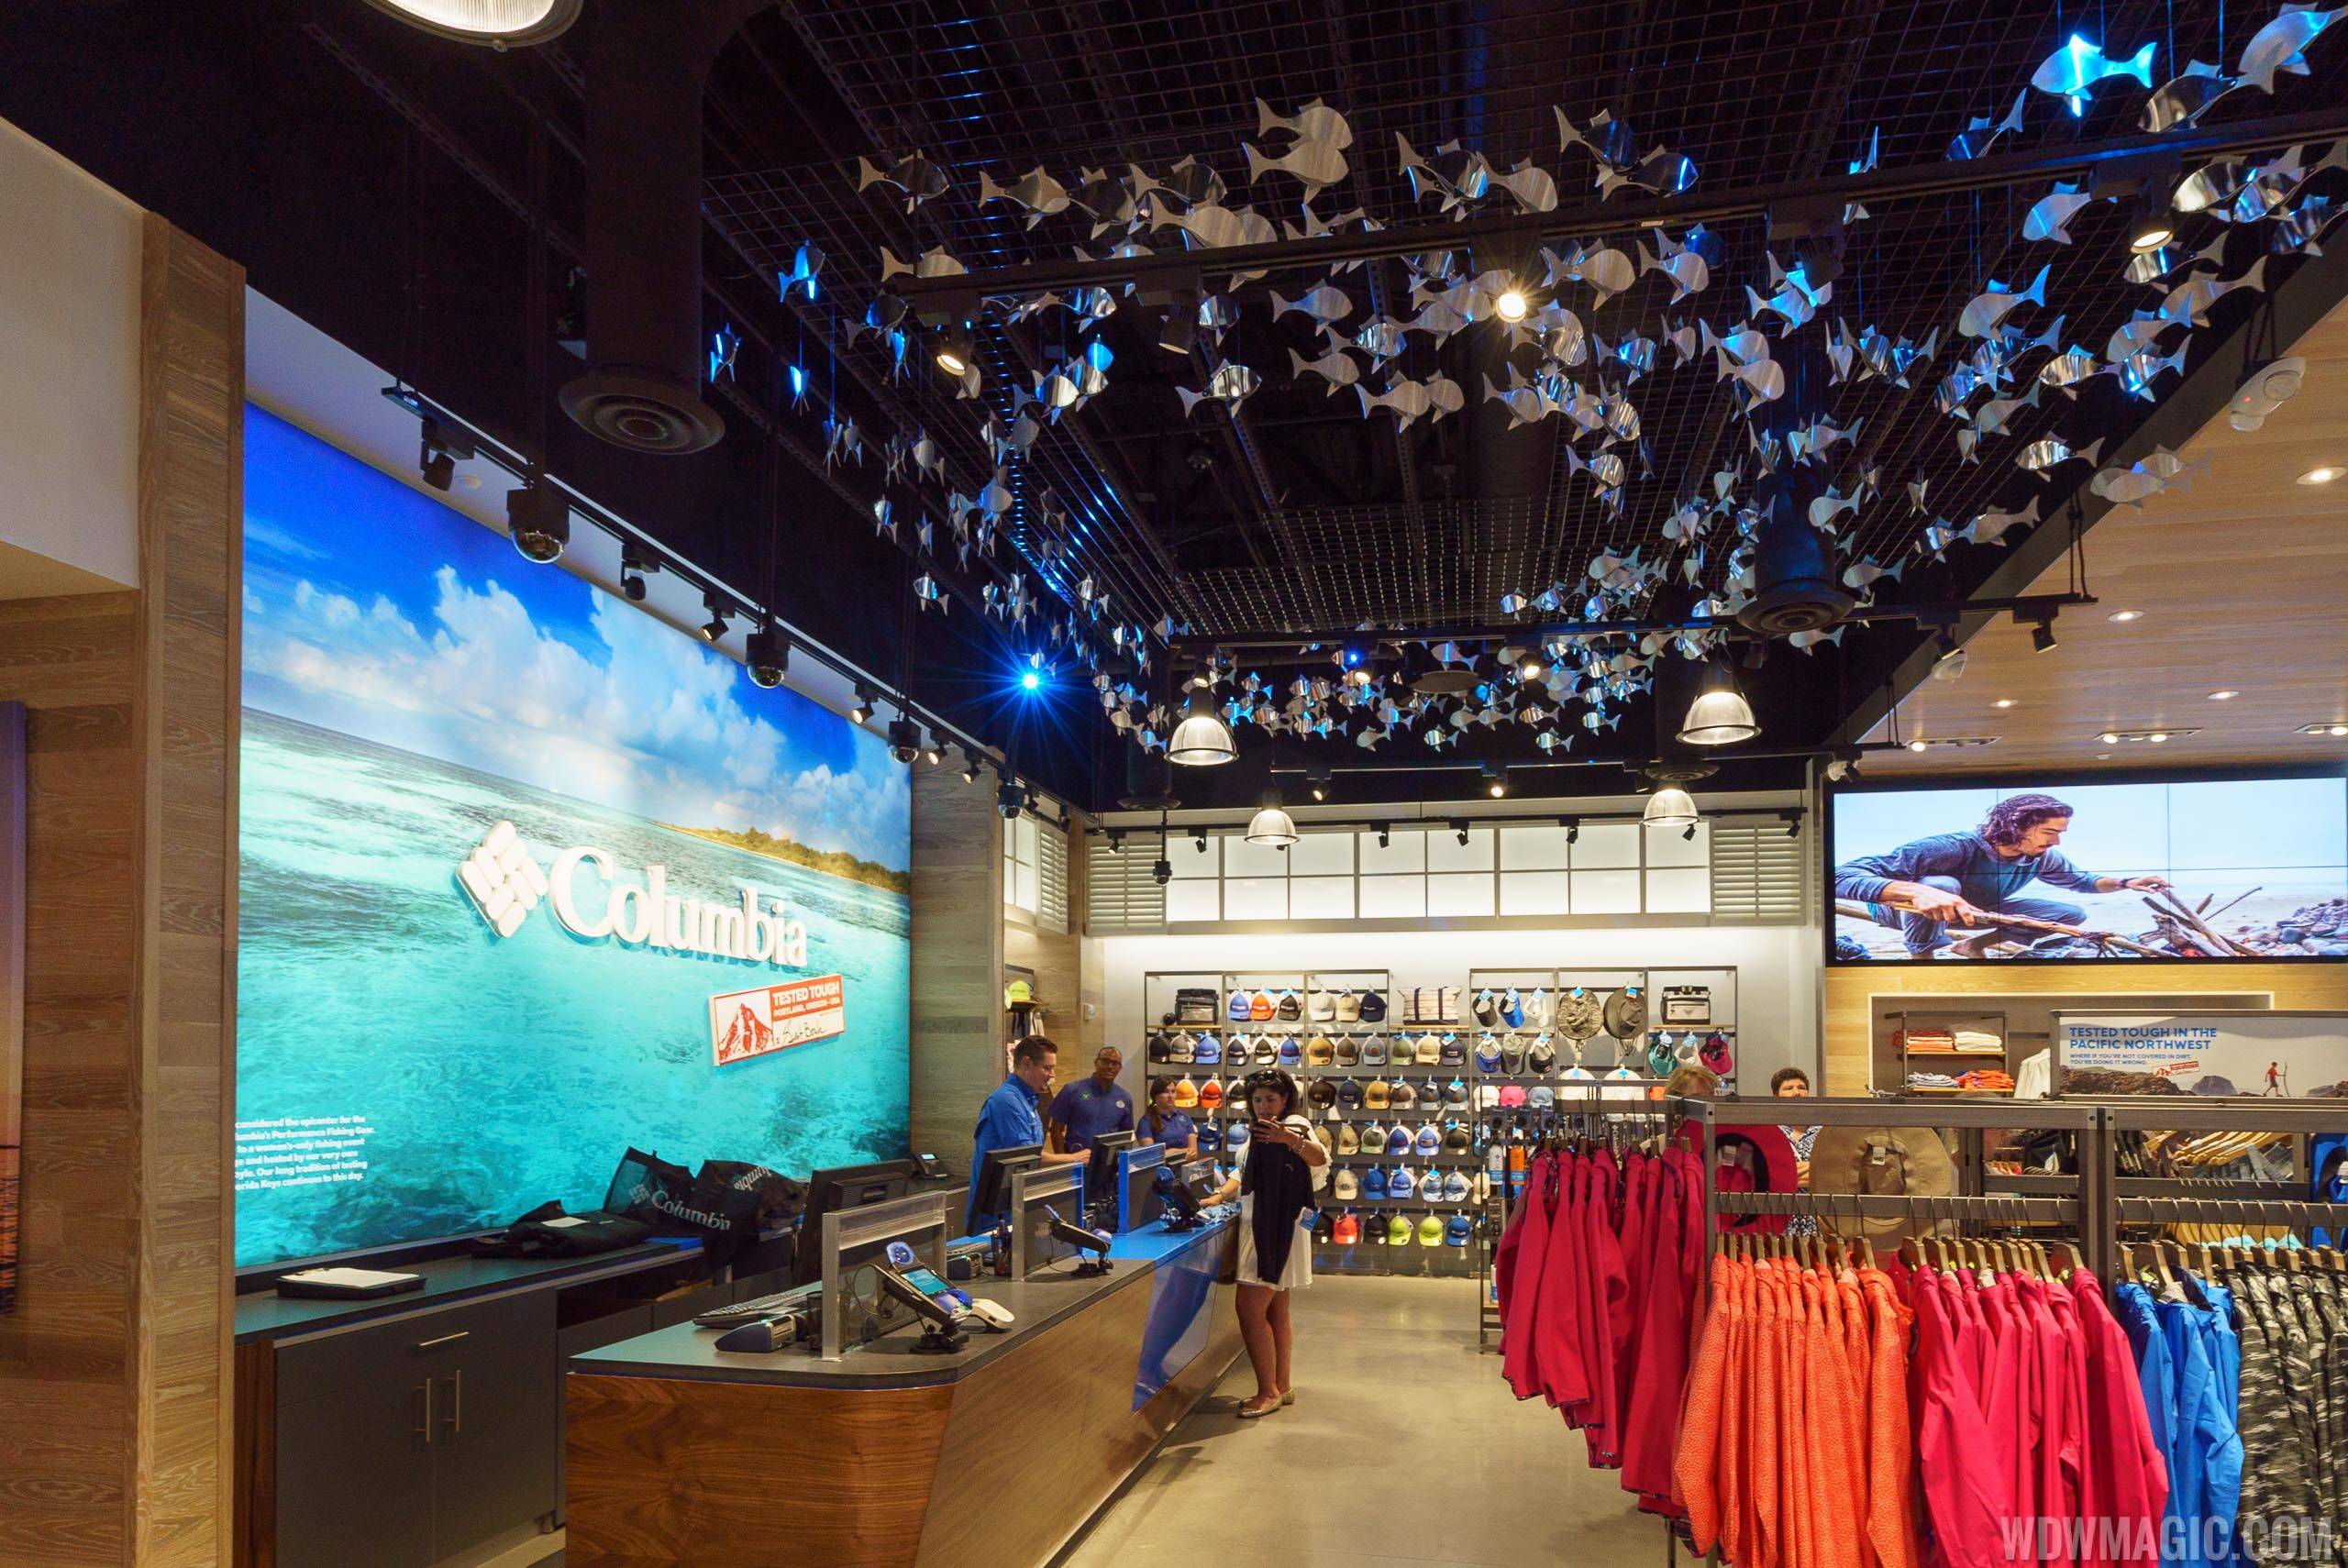 PHOTOS - Columbia Sportswear Company opens in the Town Center at